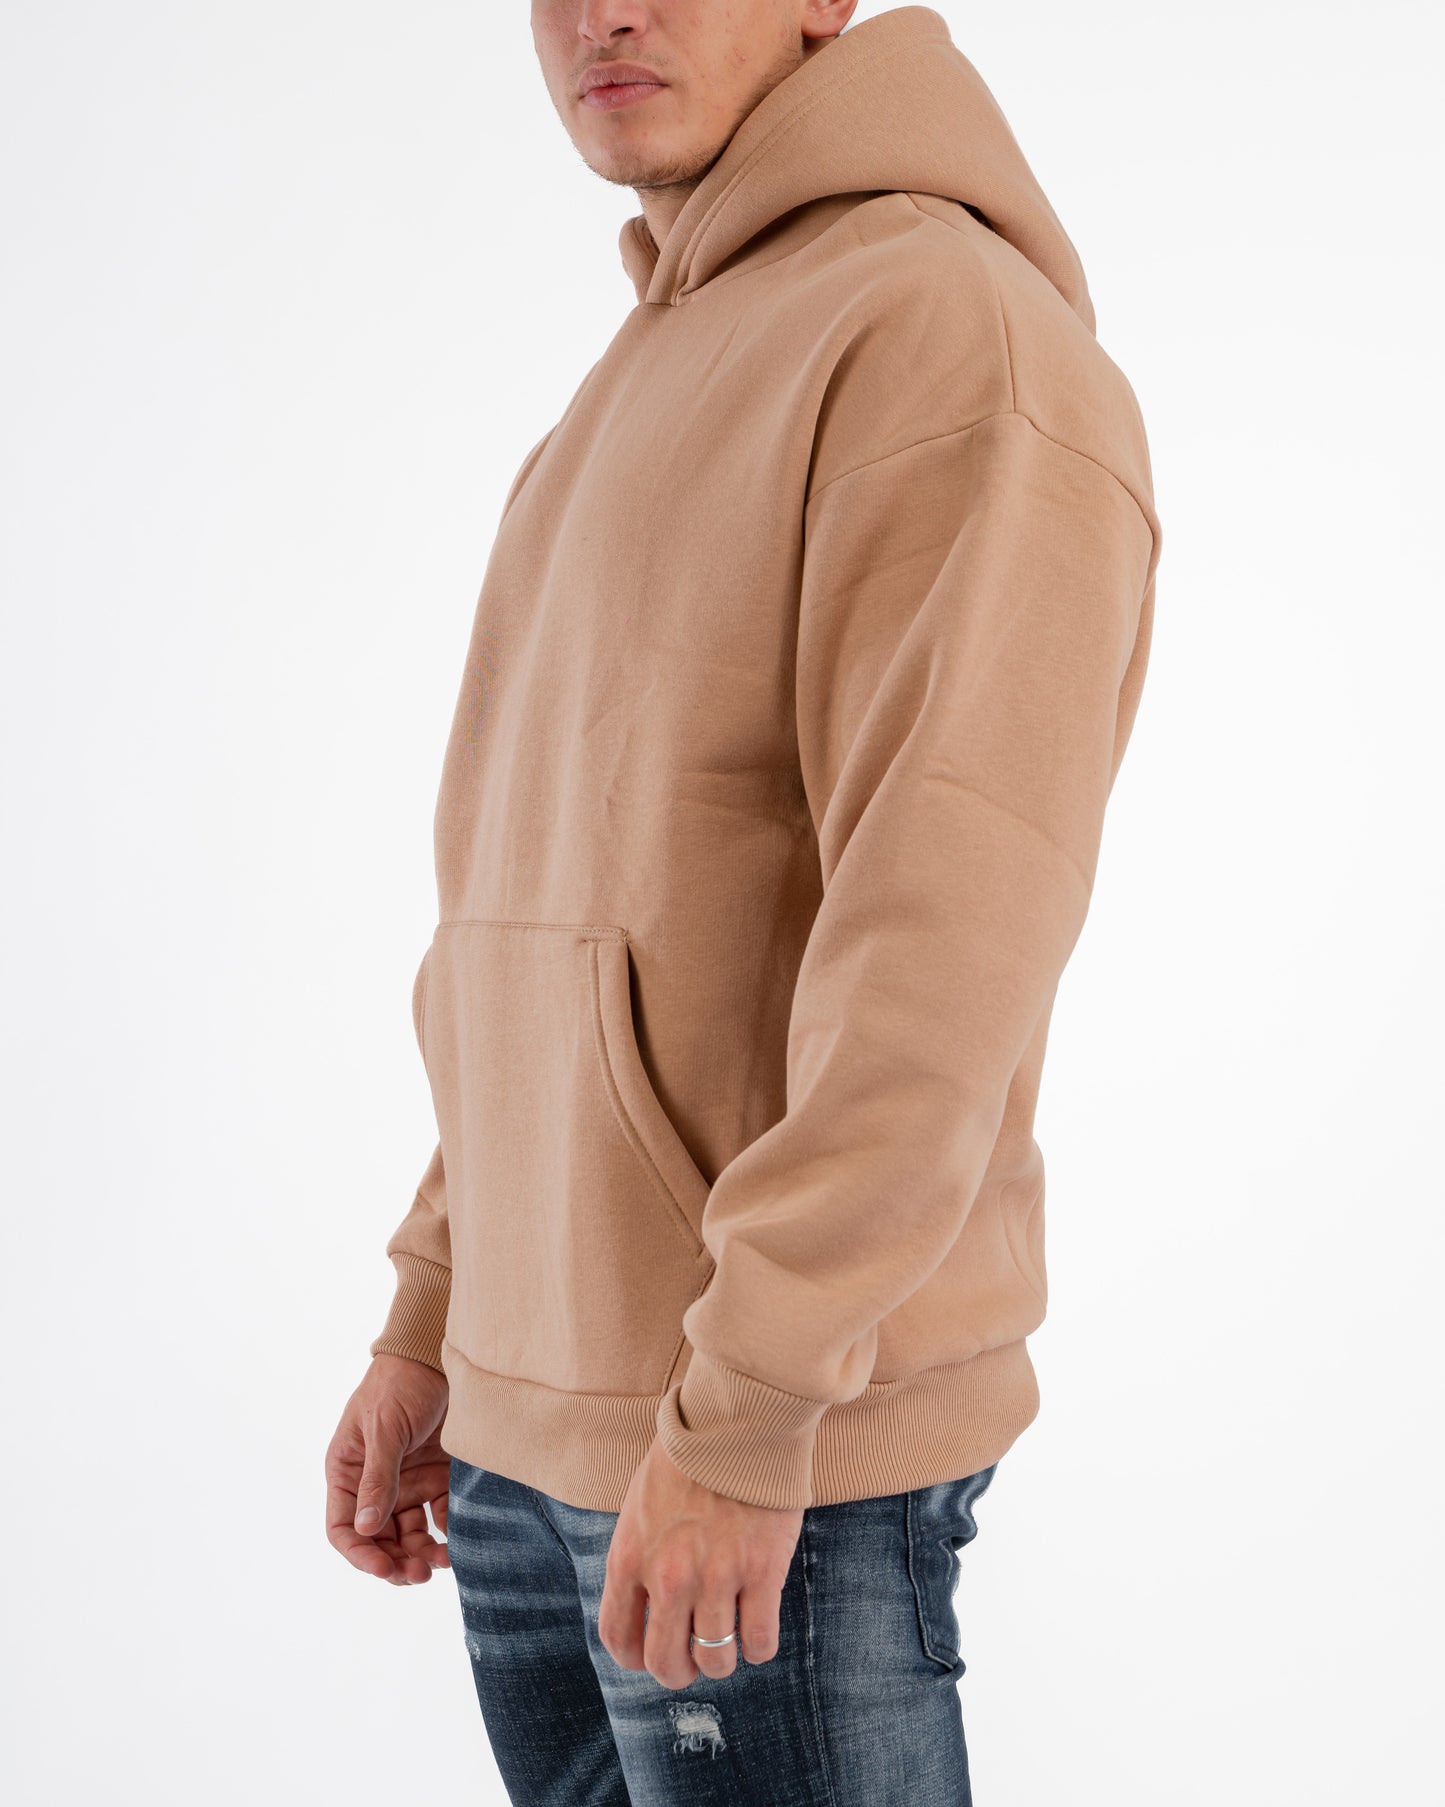 TAWNY BROWN OVER-SIZED HOODIE